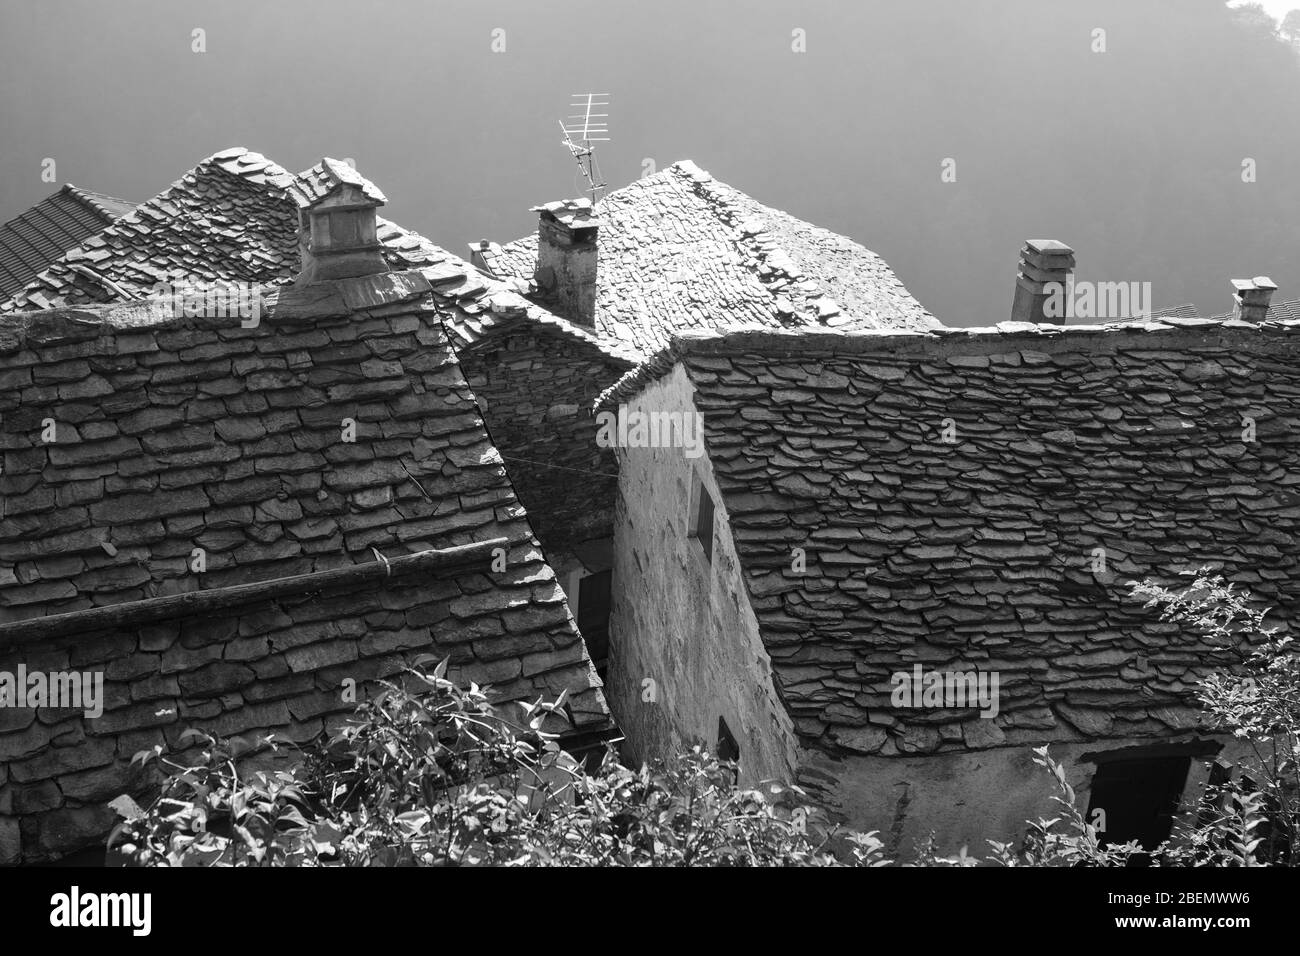 old alpine village built on top of a mountain. Bell towers,Houses and stone roofs Stock Photo